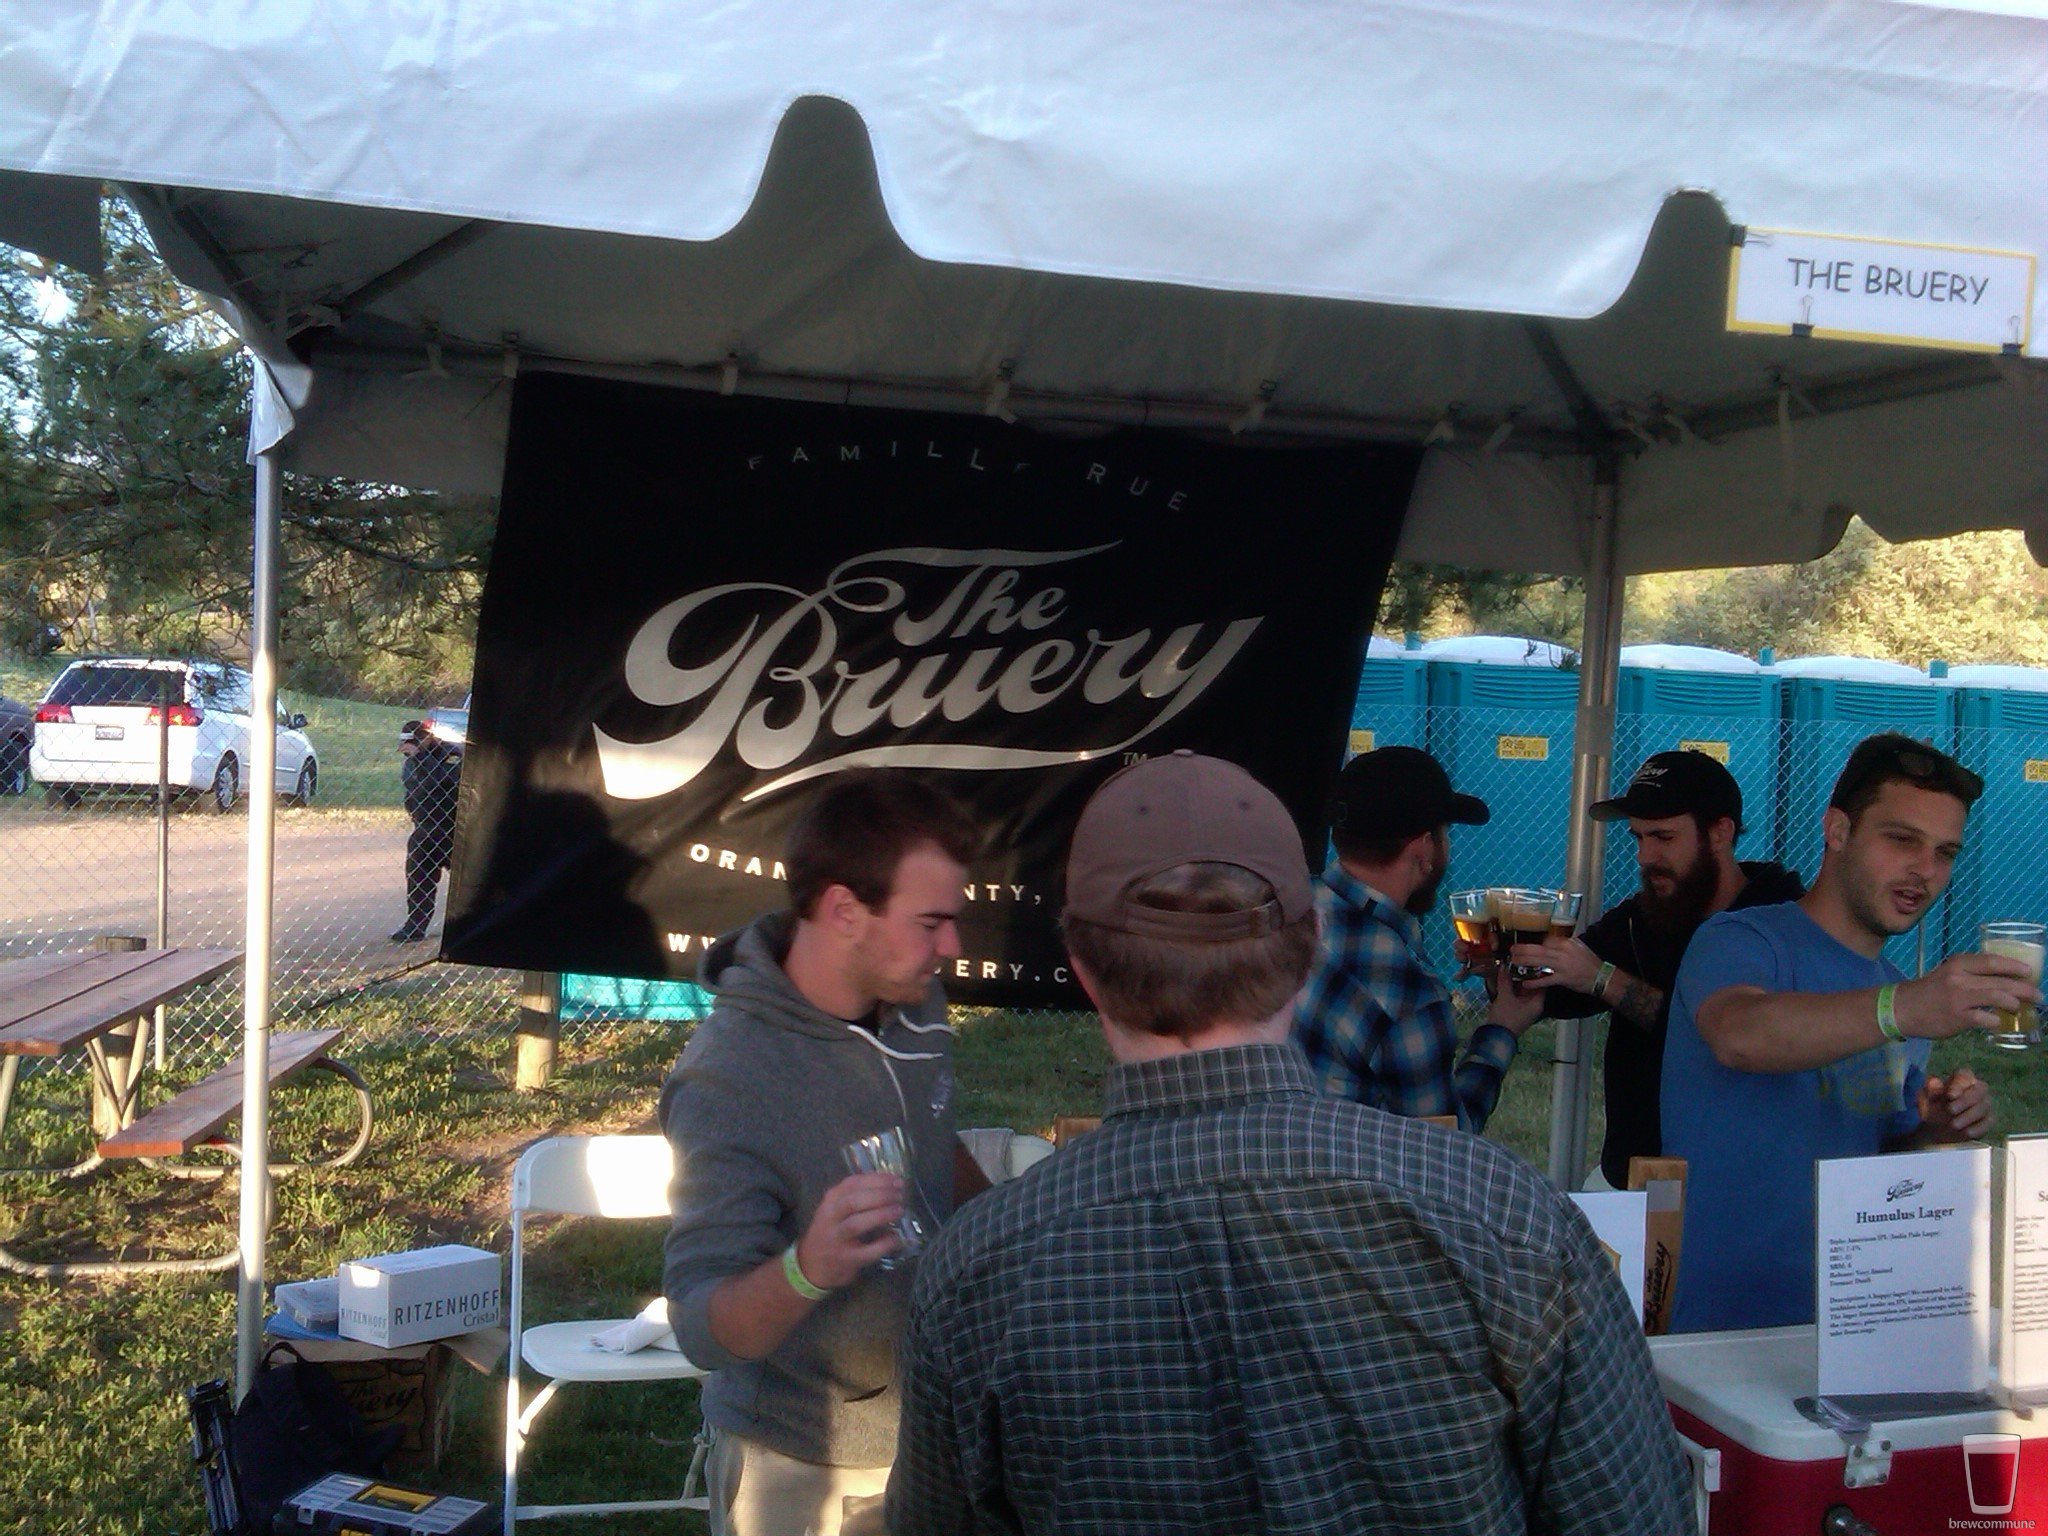 Bruery Booth @ commercial beer tasting
